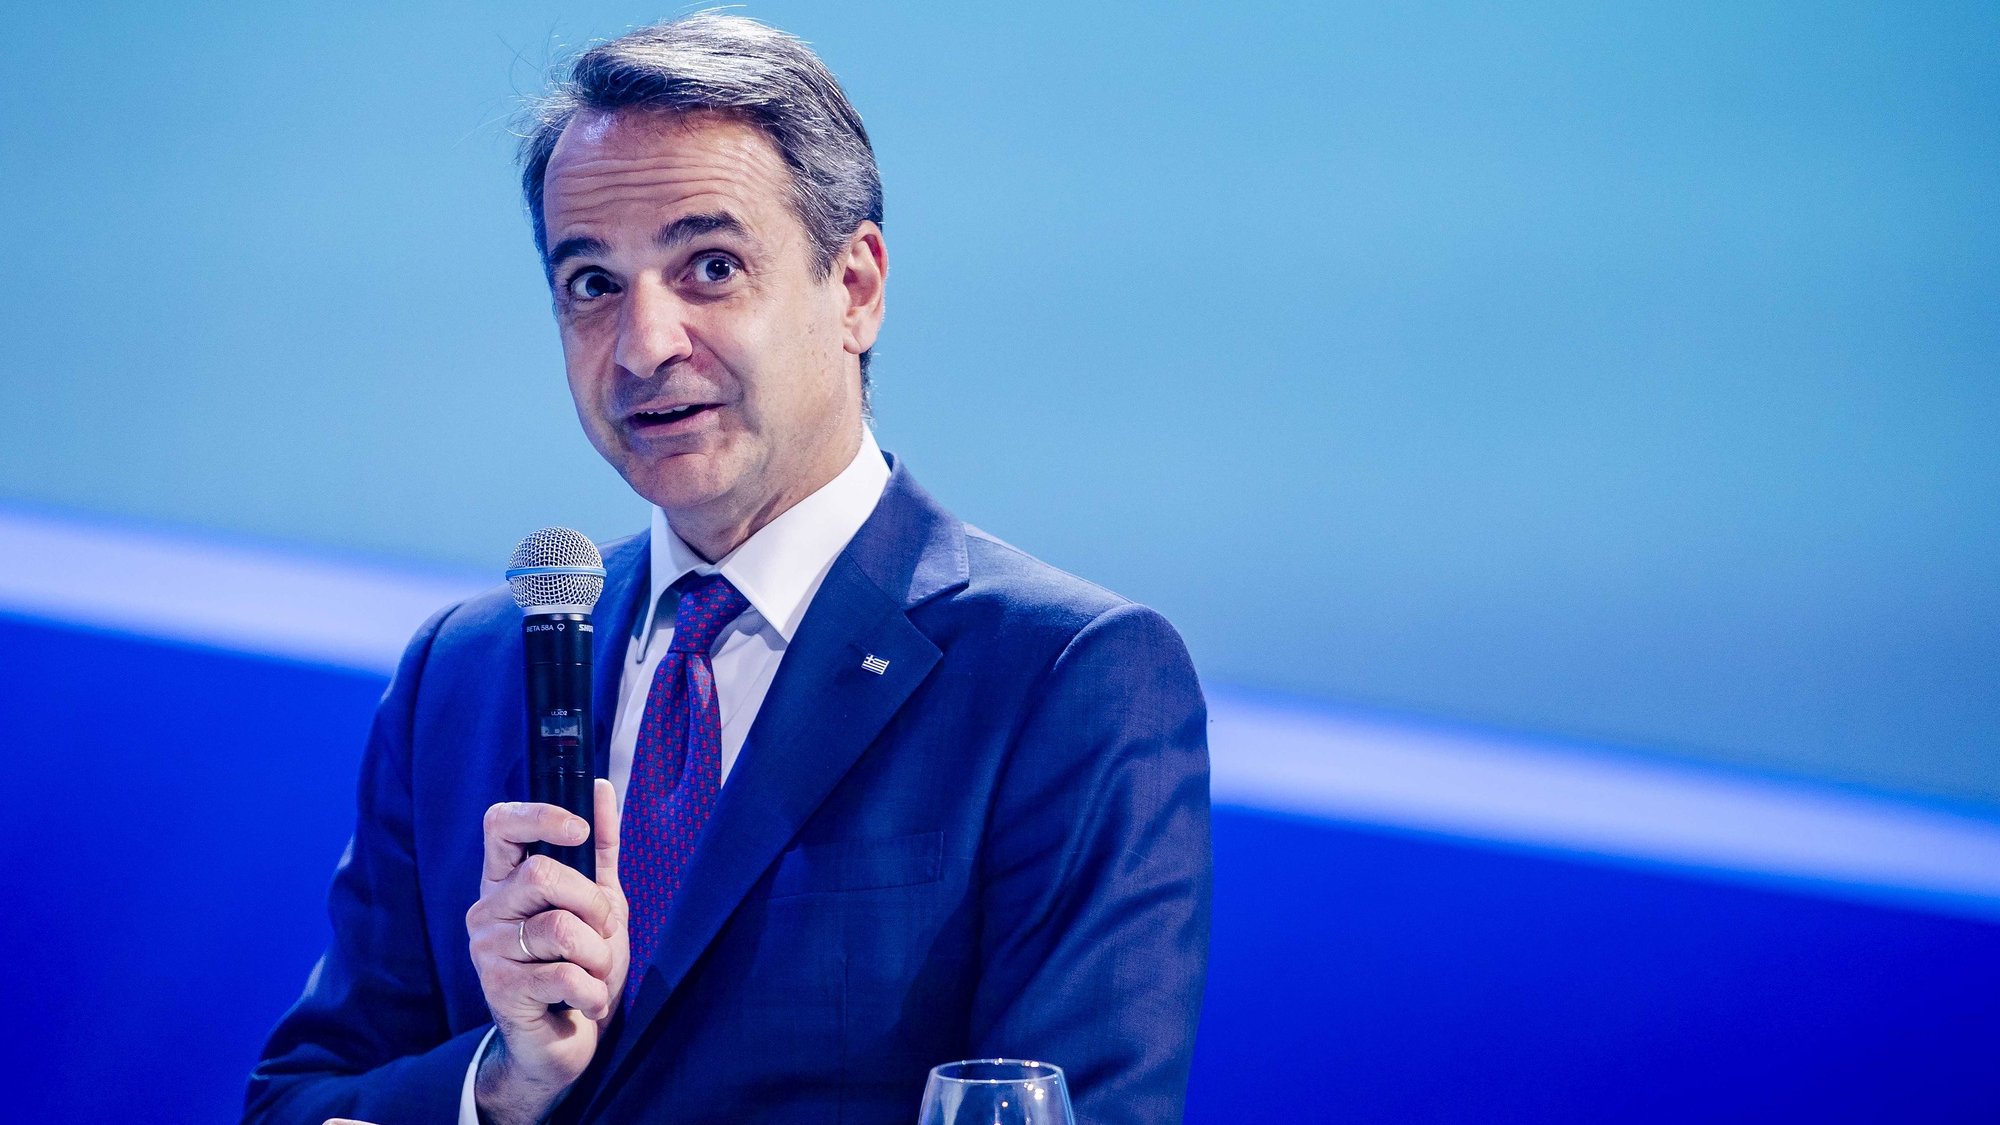 epa09988257 Greece Prime Minister Kyriakos Mitsotakis  speaks during the first day of the EPP conference in Ahoy Rotterdam, the Netherlands, 31 May 2022. The EPP Congress is organized by the European People&#039;s Party (EPP), the political family of the Christian Democrats in Europe.  EPA/SEM VAN DER WAL